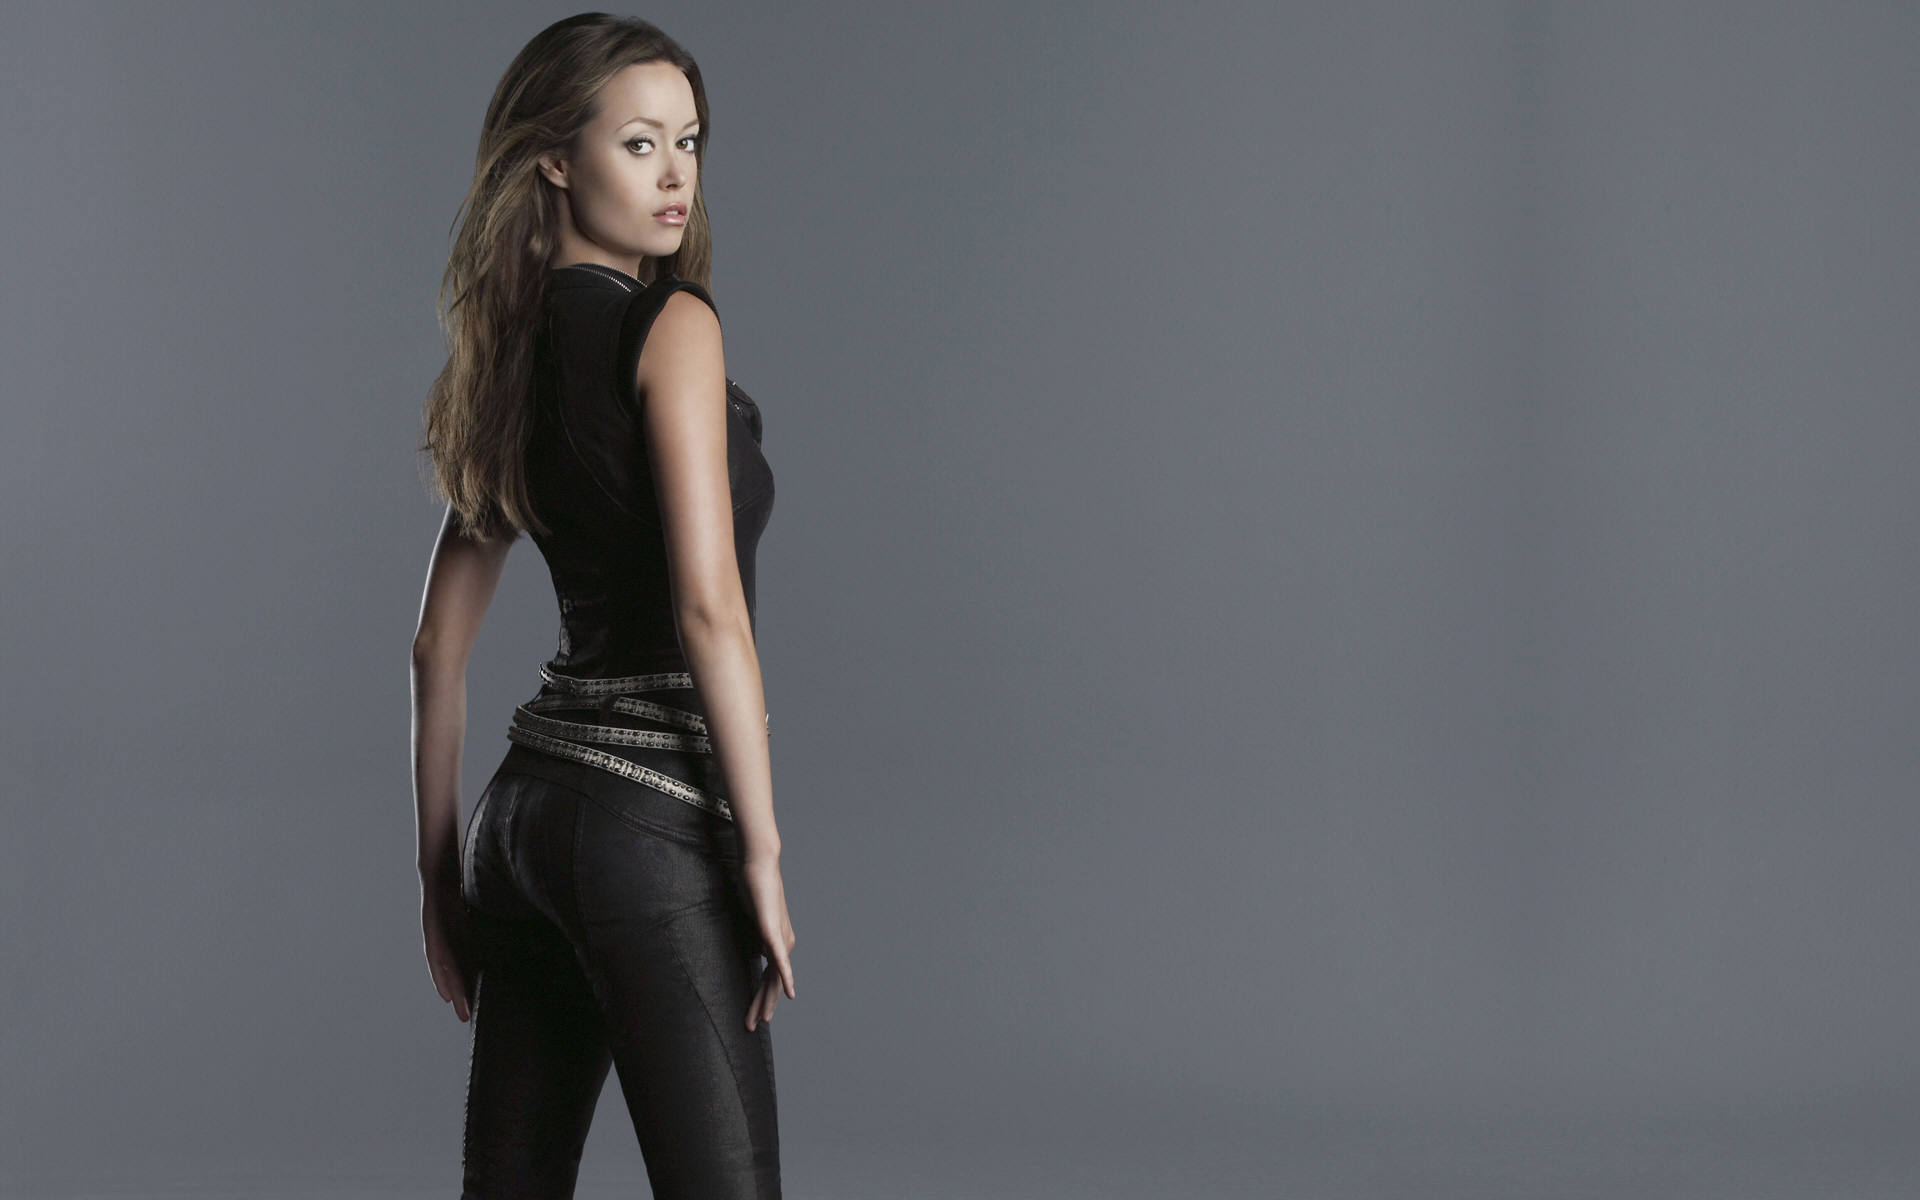 Summer Glau Wallpapers High Resolution and Quality Download